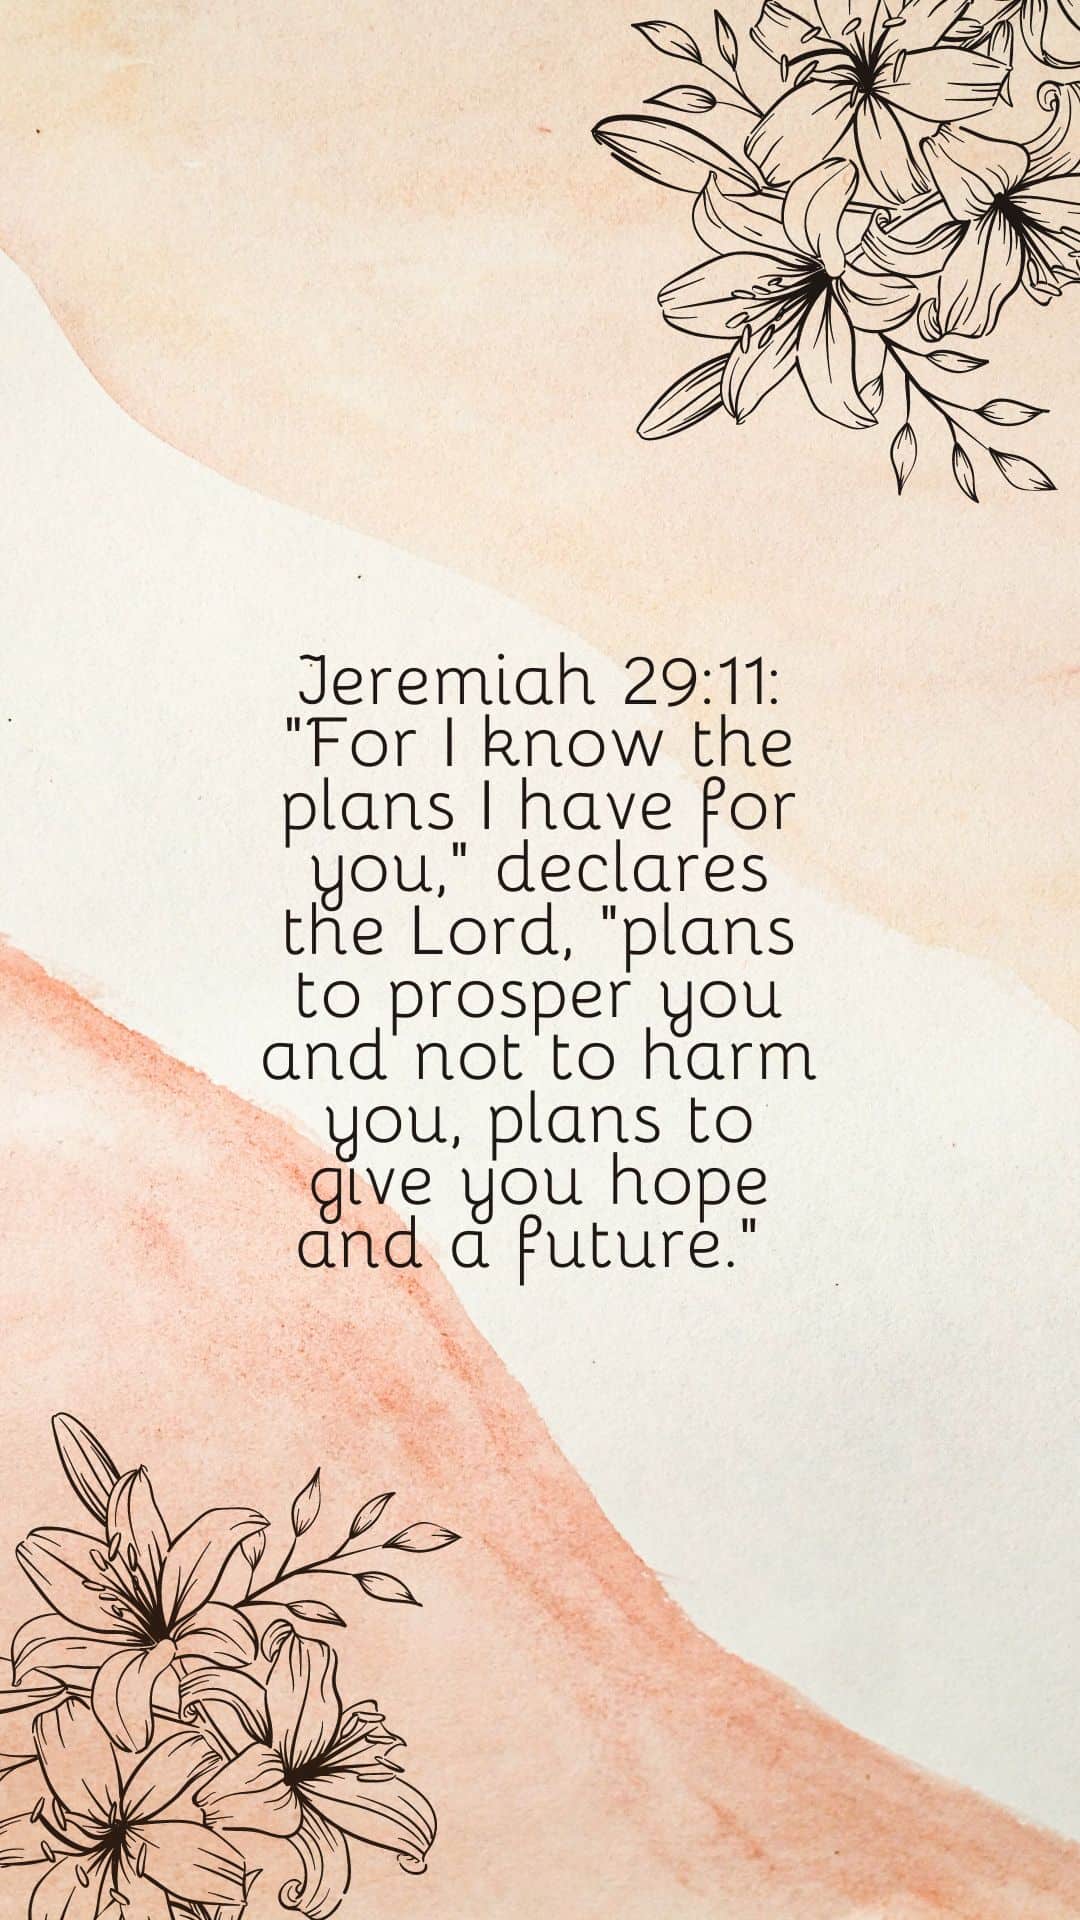 Jeremiah 29:11: "For I know the plans I have for you," declares the Lord, "plans to prosper you and not to harm you, plans to give you hope and a future." 